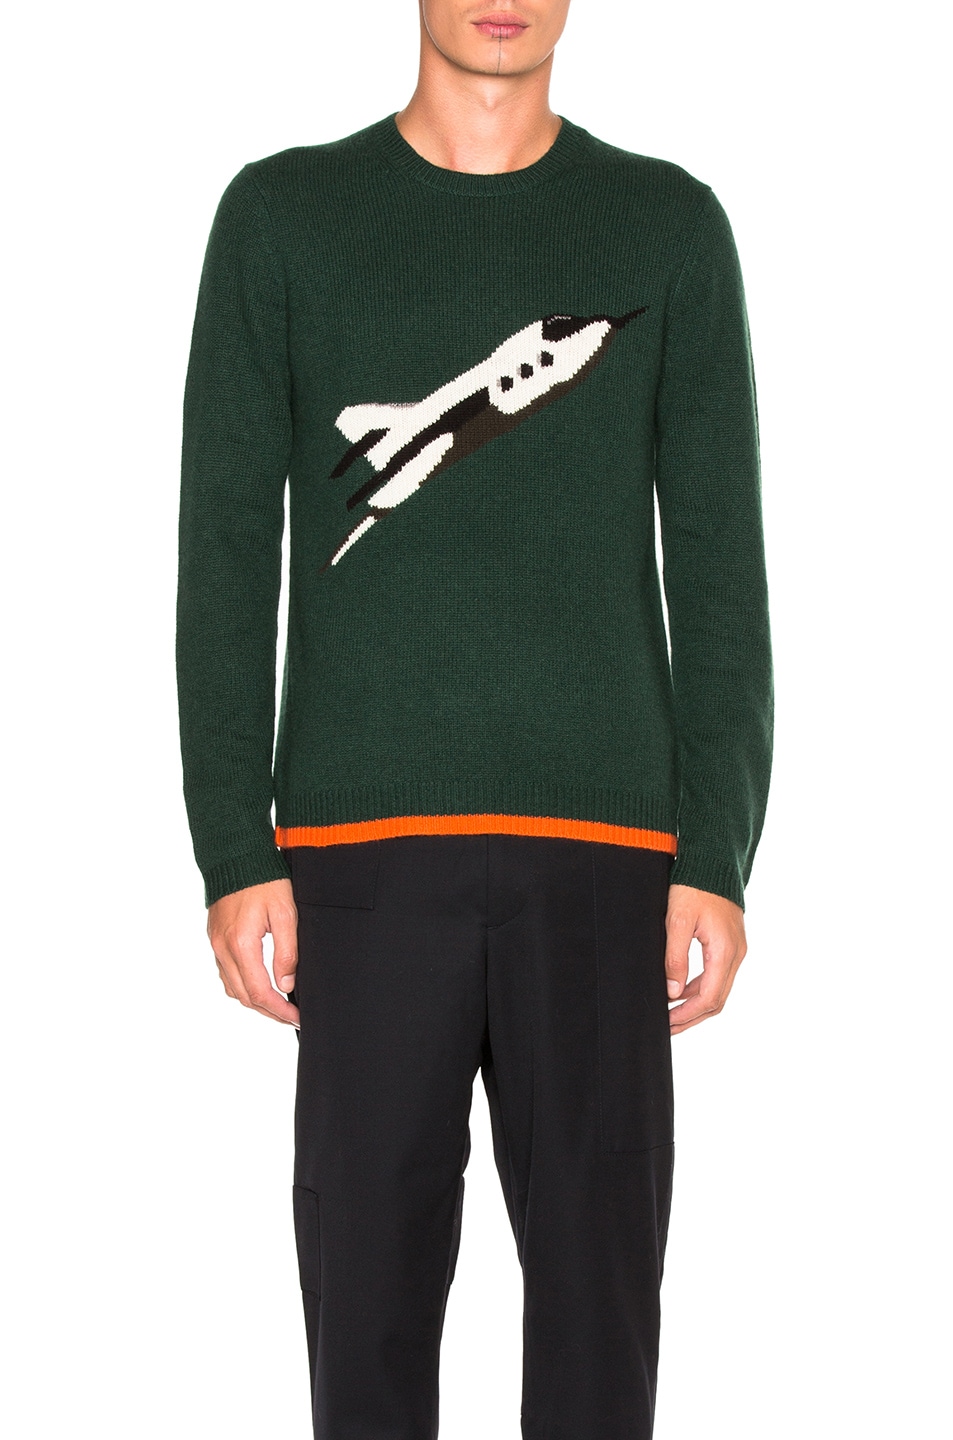 Image 1 of Coach Rocket Ship Crew Neck Sweater in Pine